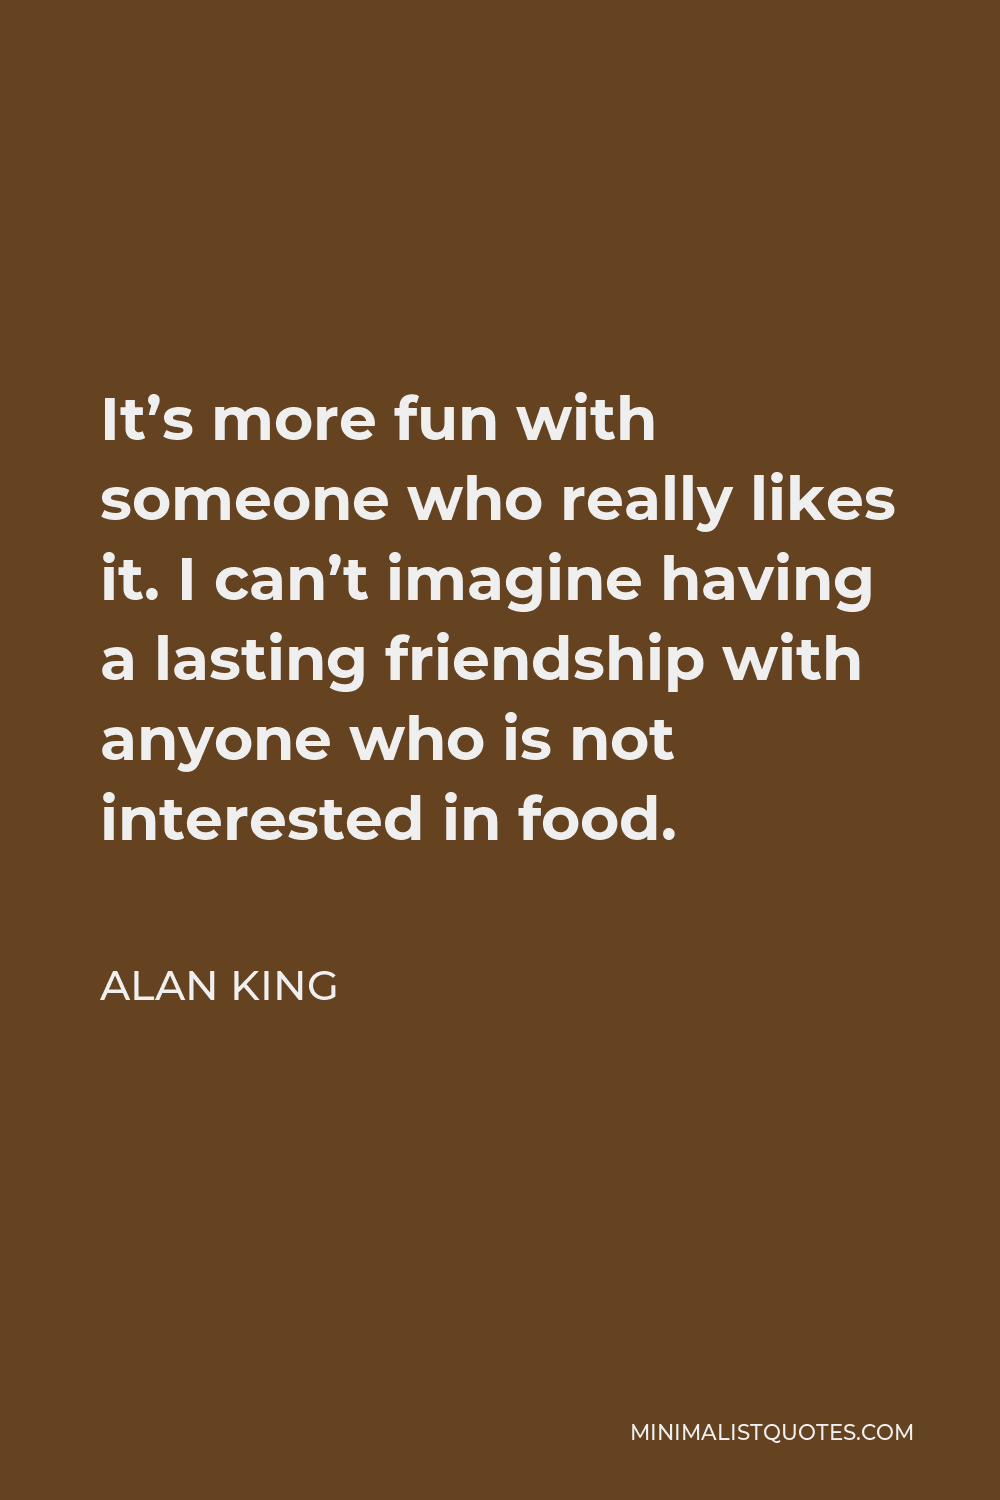 Alan King Quote - It’s more fun with someone who really likes it. I can’t imagine having a lasting friendship with anyone who is not interested in food.